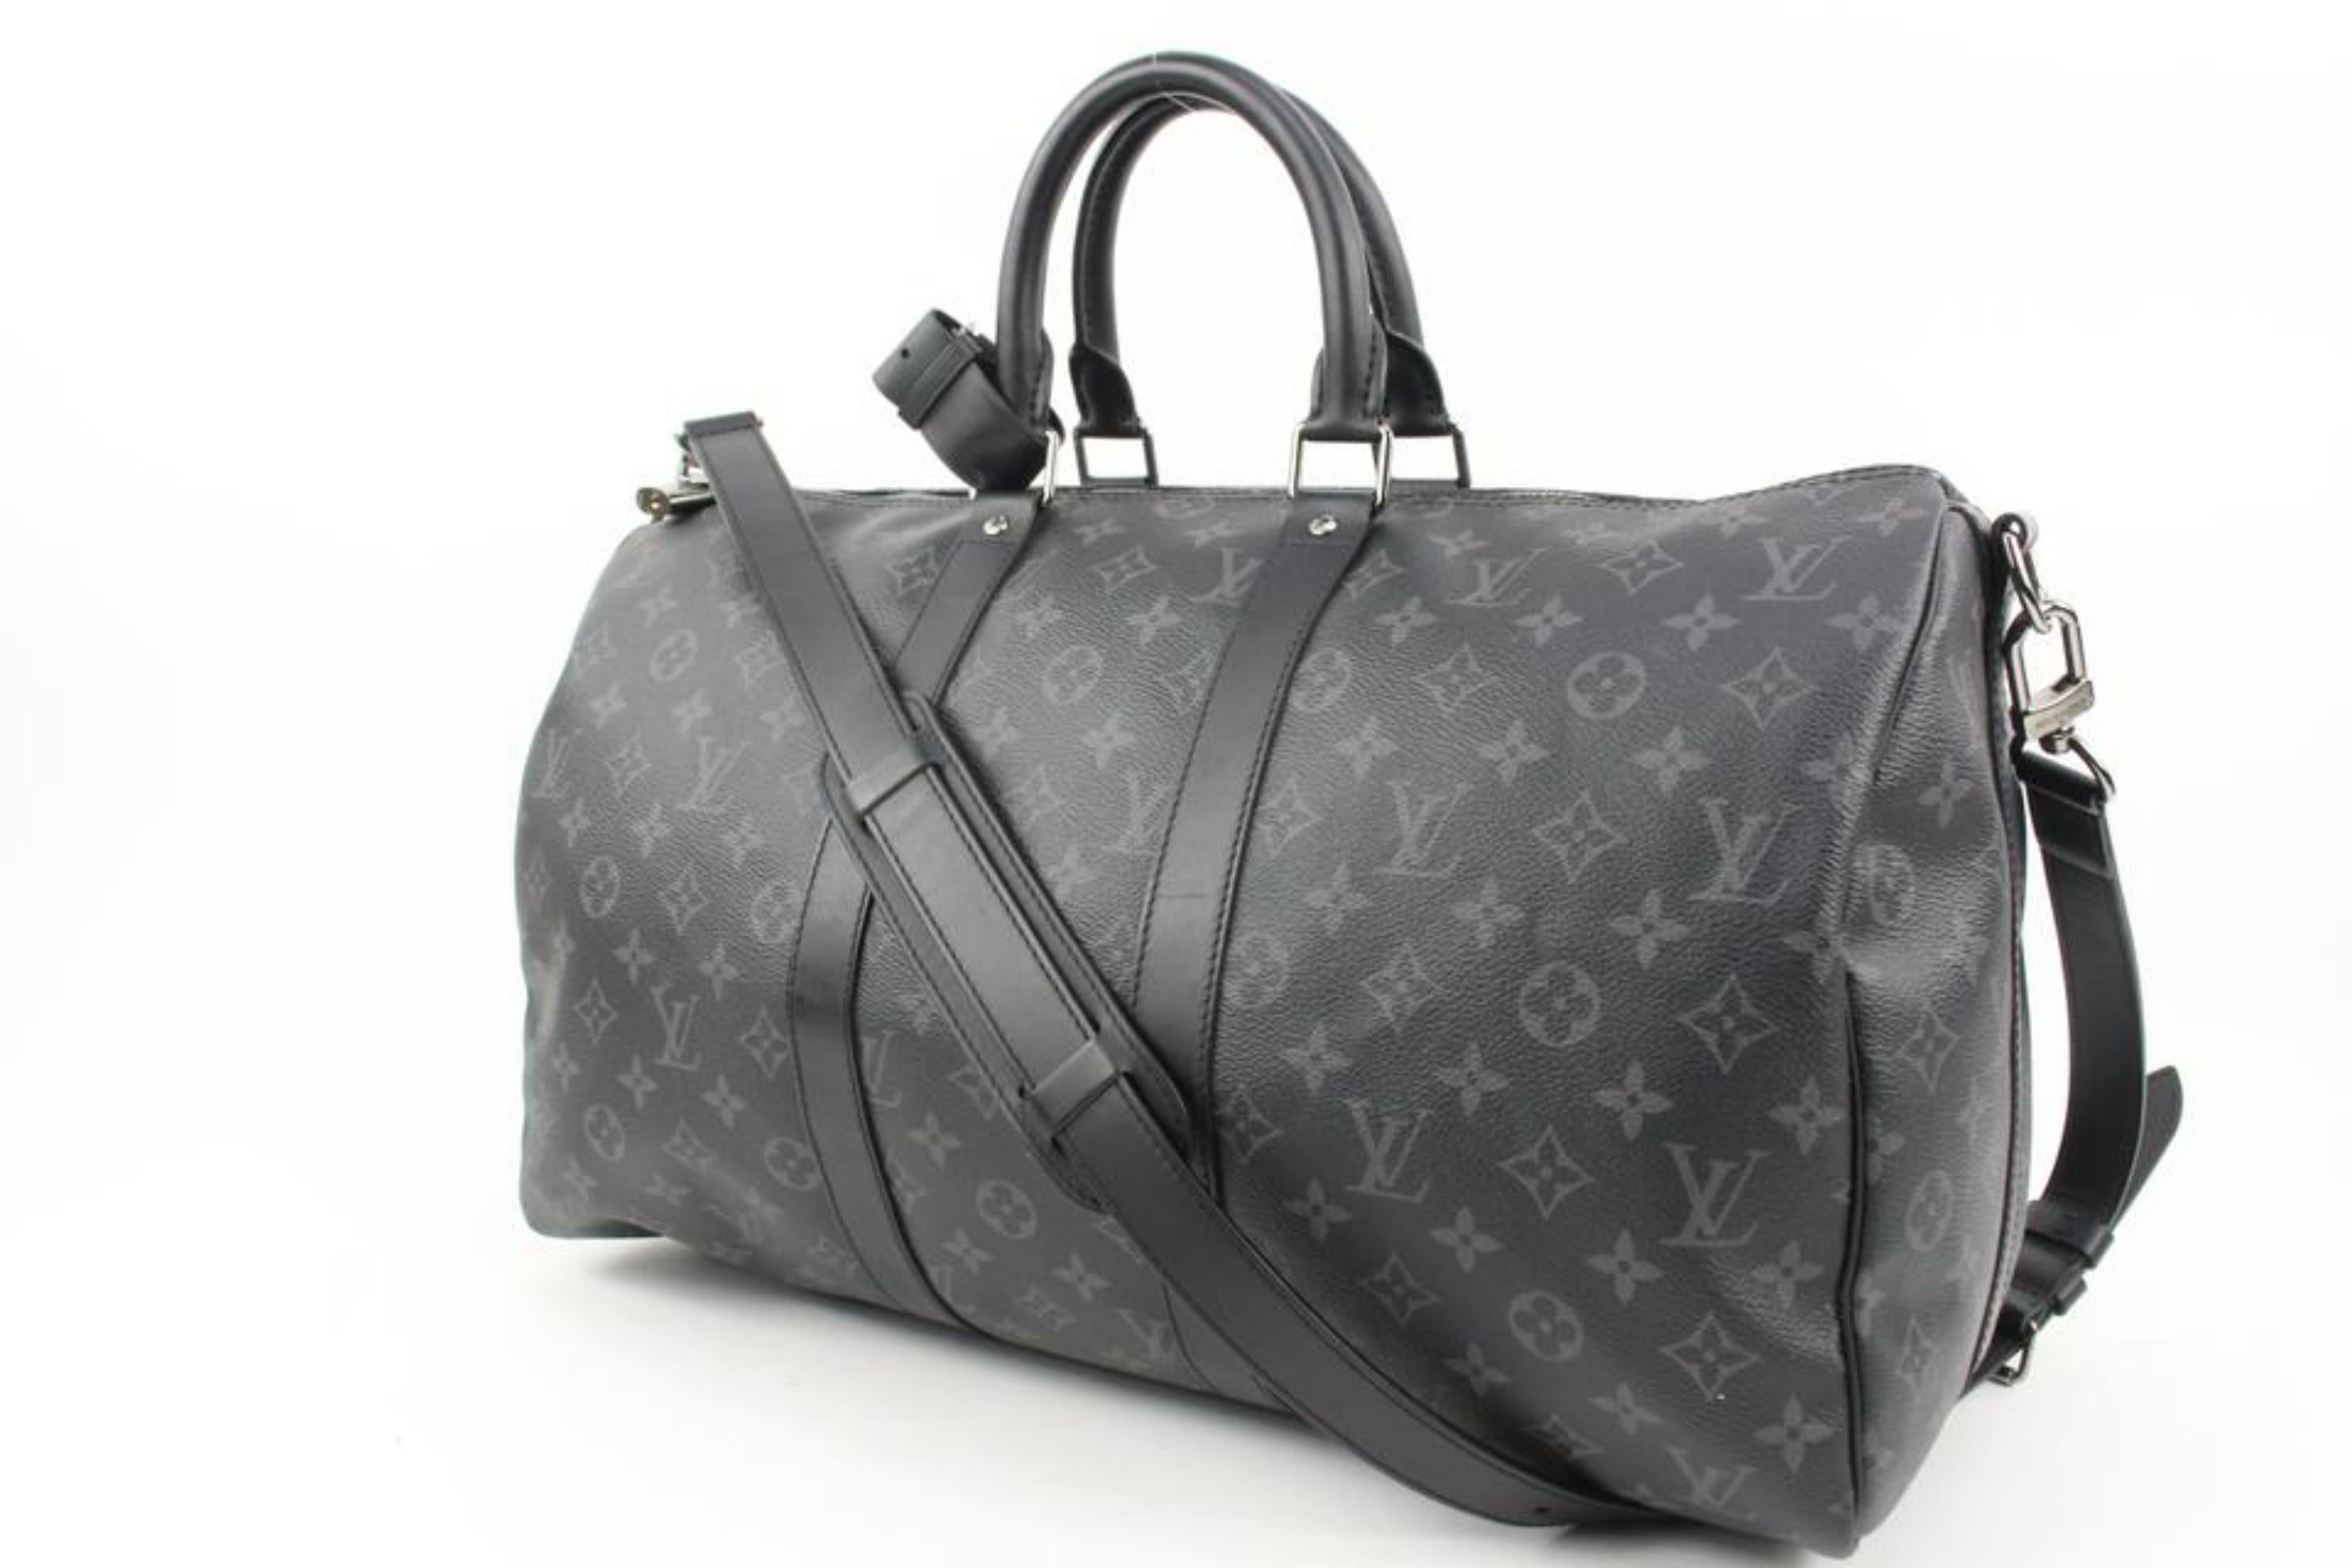 LOUIS VUITTON X SUPREME 100% AUTHENTIC LV KEEPALL 55 BLACK HOLDALL